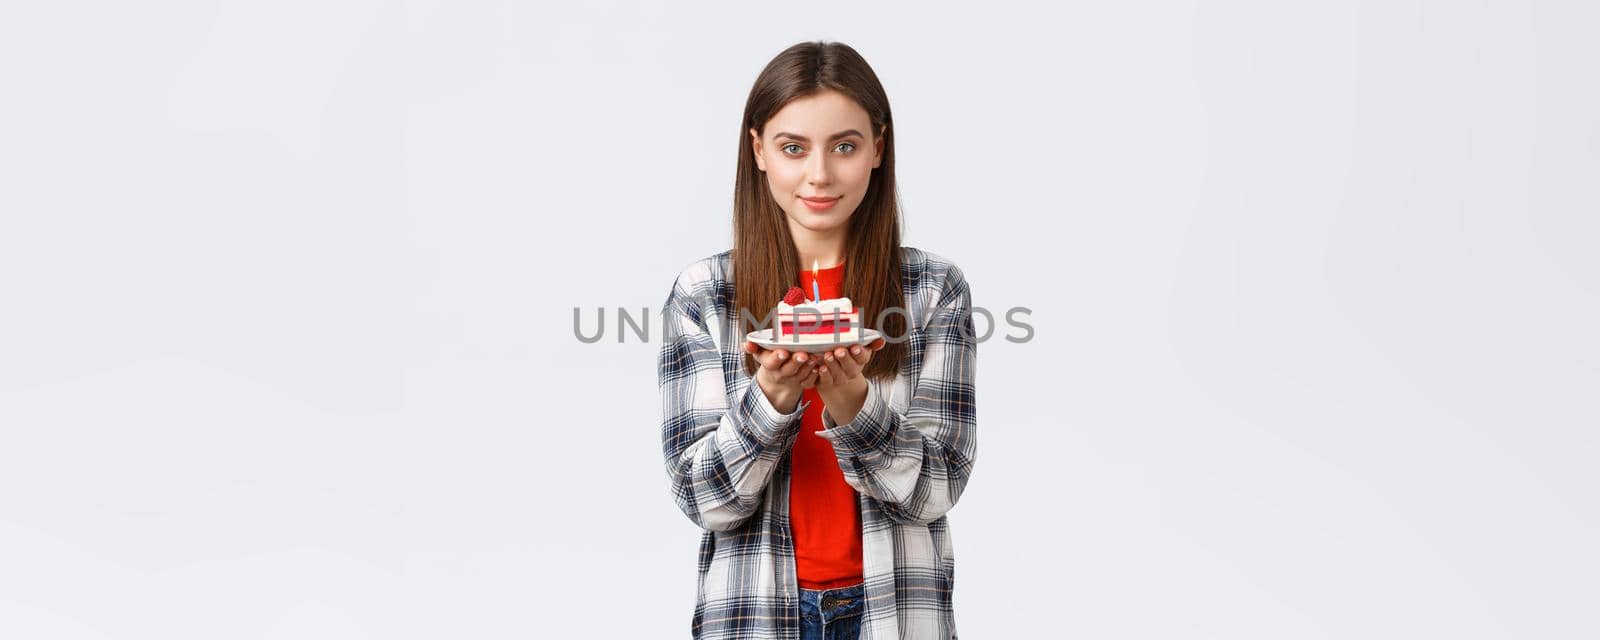 People lifestyle, holidays and celebration, emotions concept. Dreamy gorgeous young woman celebrate her birthday, holding b-day cake with lit candle, smiling kind at camera.